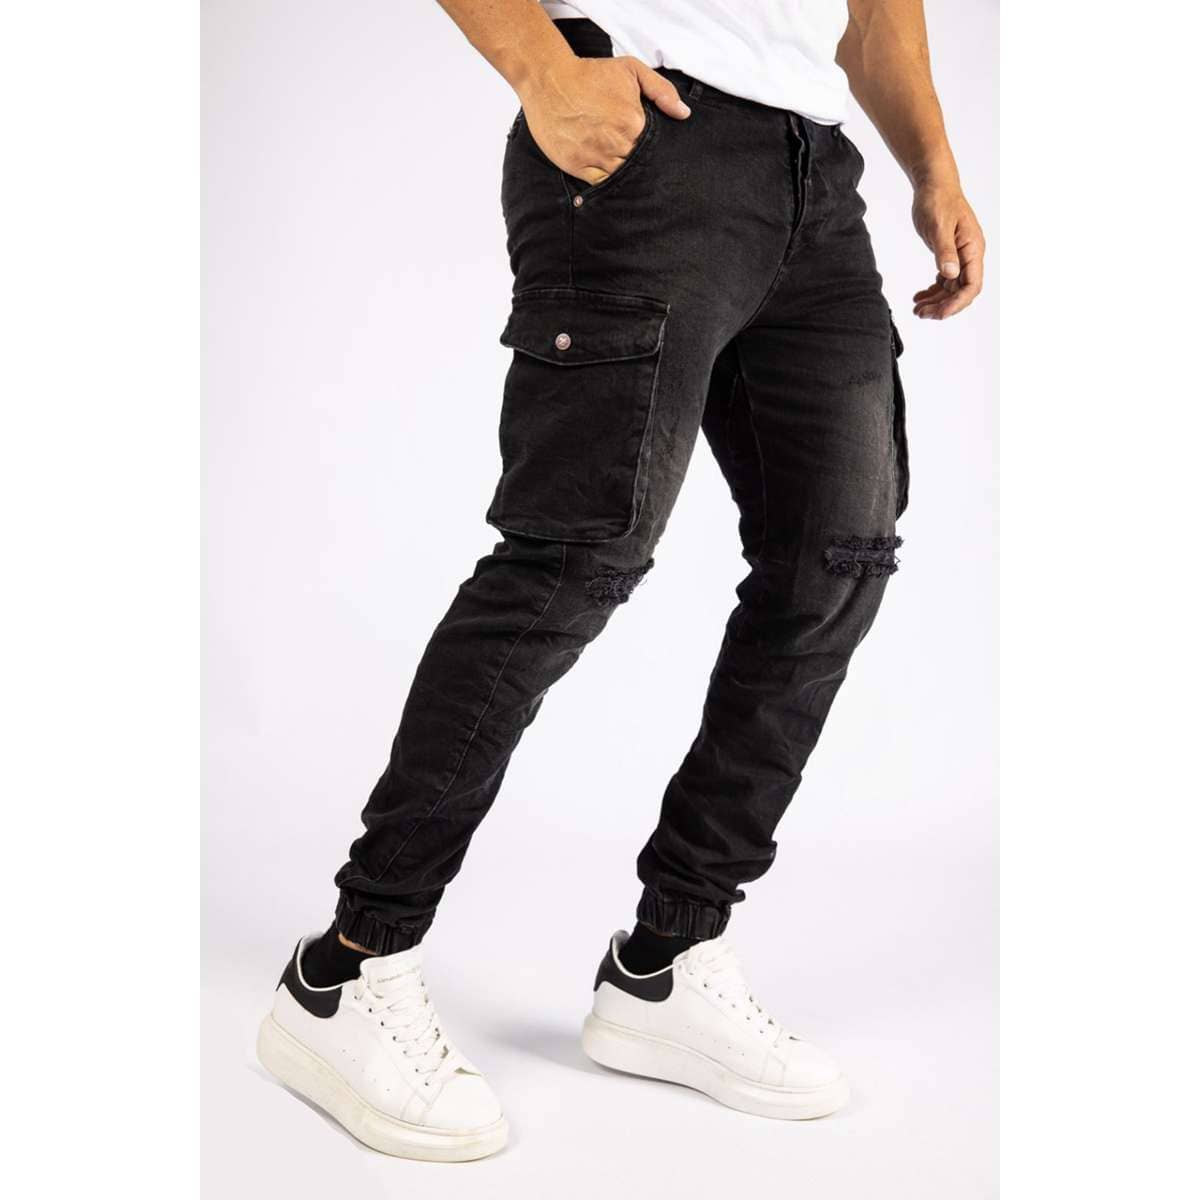 MEN΄S SENIOR CARGO JEANS WITH ELASTICATED ANKLE CUFFS SNRJ374 BLACK